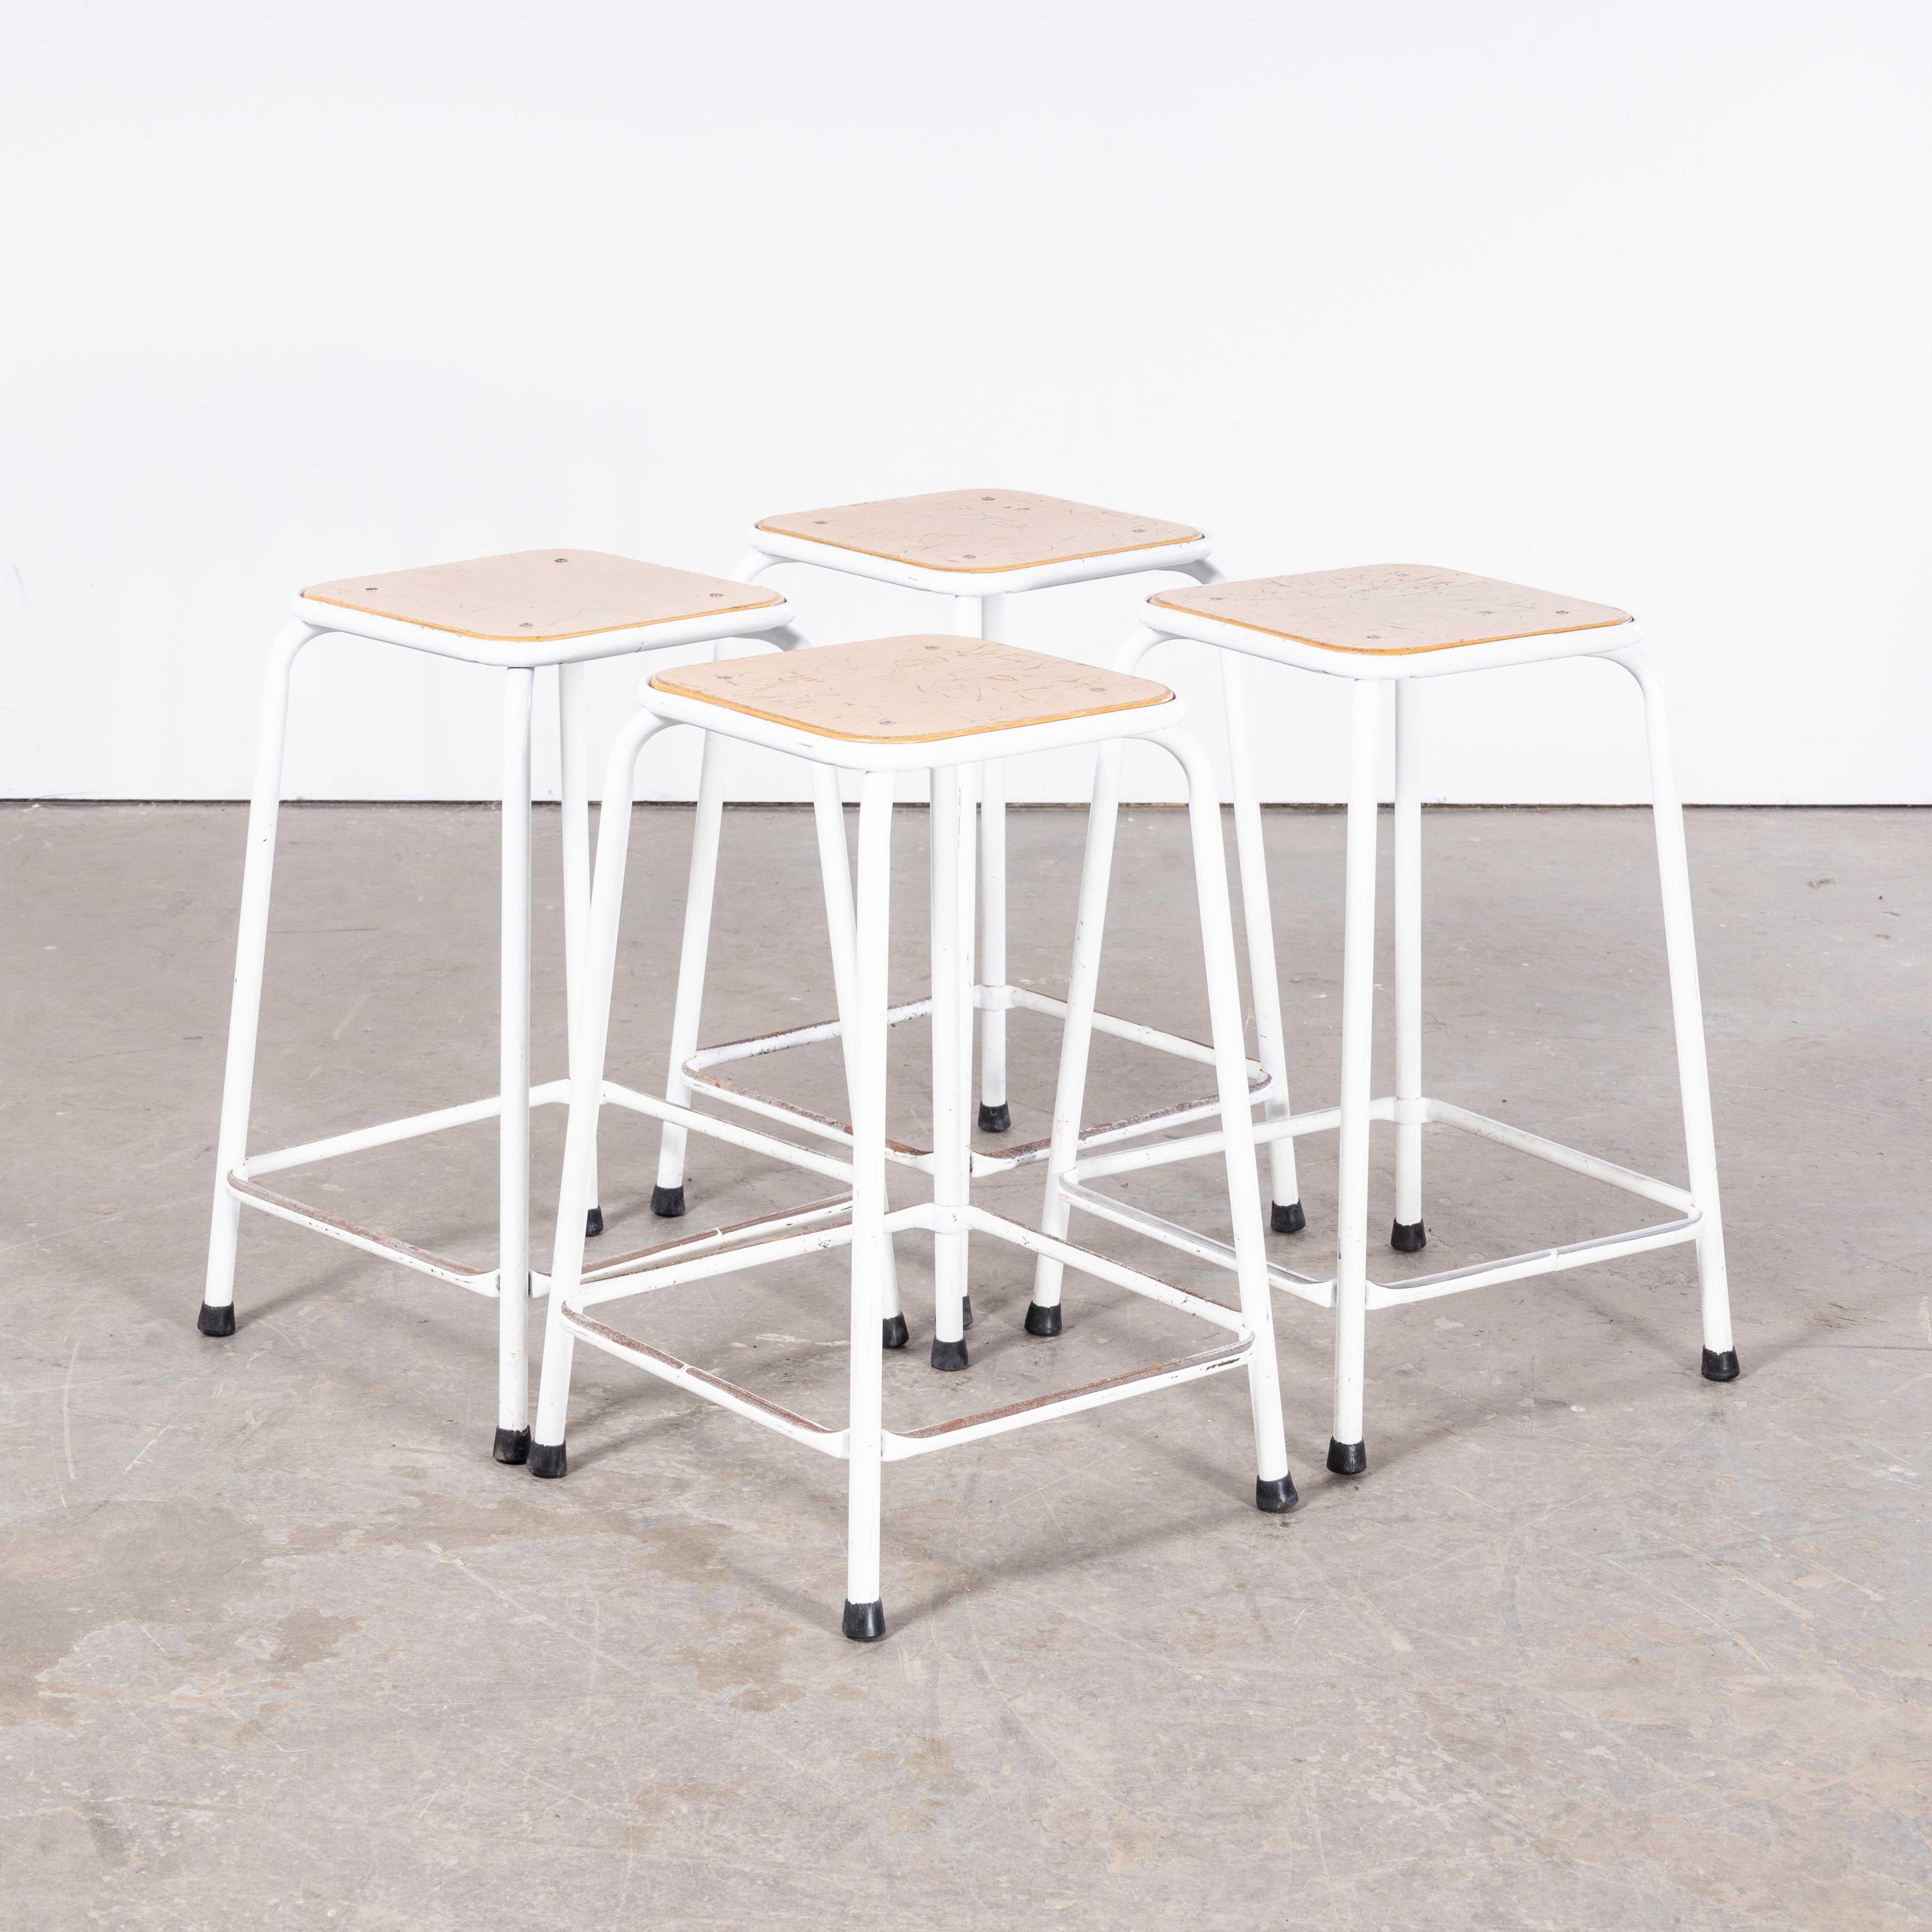 1970’s French White Laboratory Stools – Set Of Four
1970’s French White Laboratory Stools – Set Of Four. Good honest lab stools, heavy steel frames with solid heavy birch ply seats. We clean them and check all fixings, they are good to go. Seat